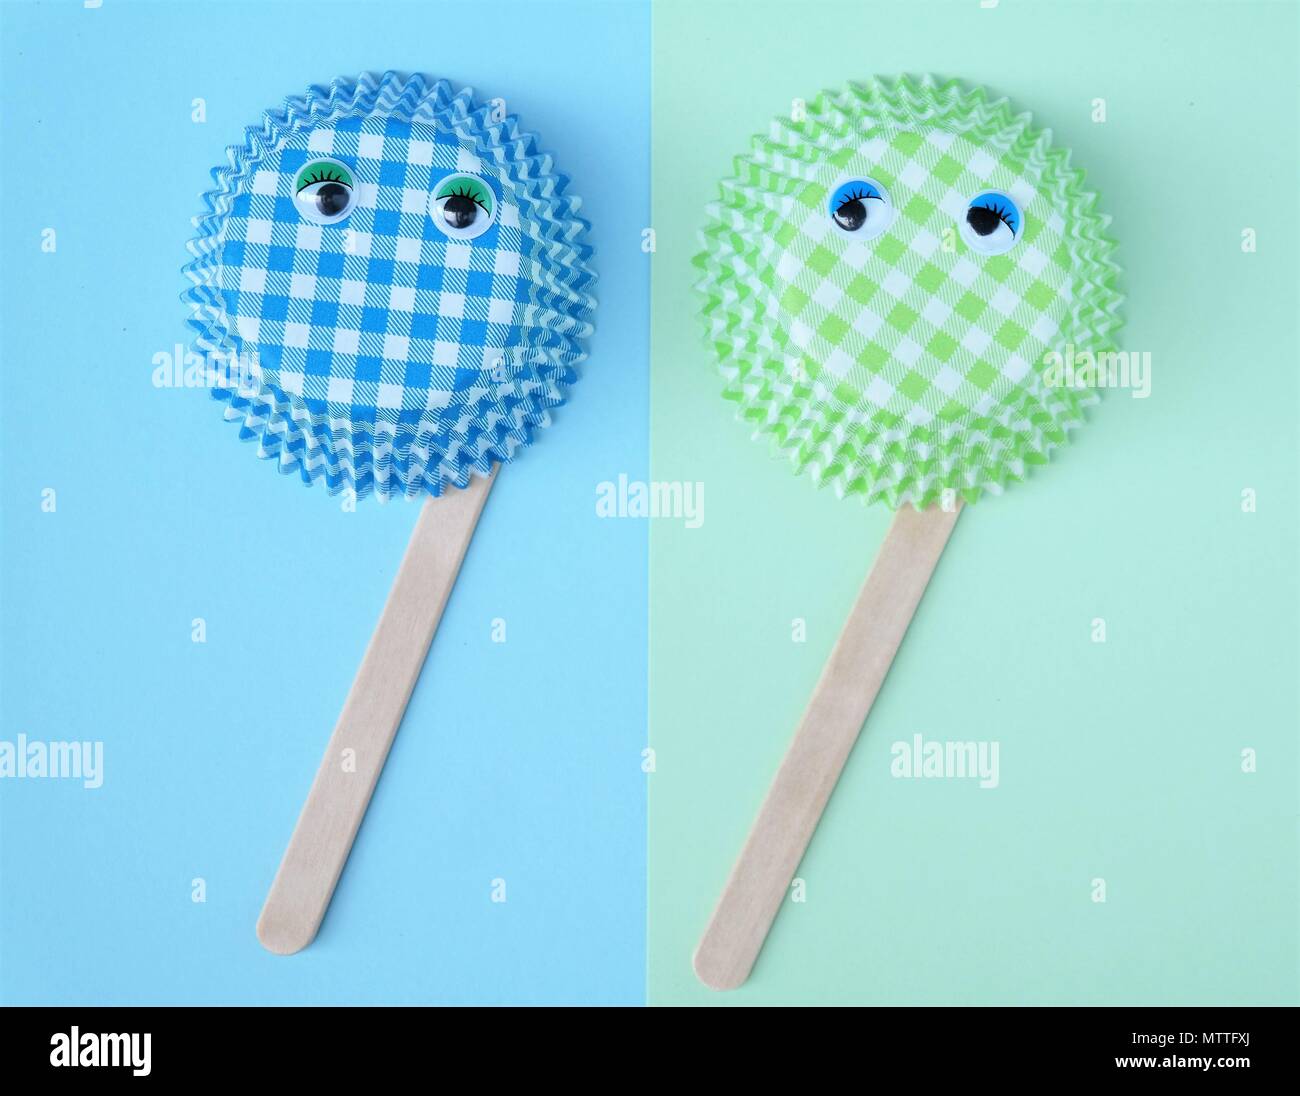 two cupcake molds of paper with wobbly eyes, ice popsicle sticks, simple concept in pastel colors green and blue. Funny creative image and text space Stock Photo